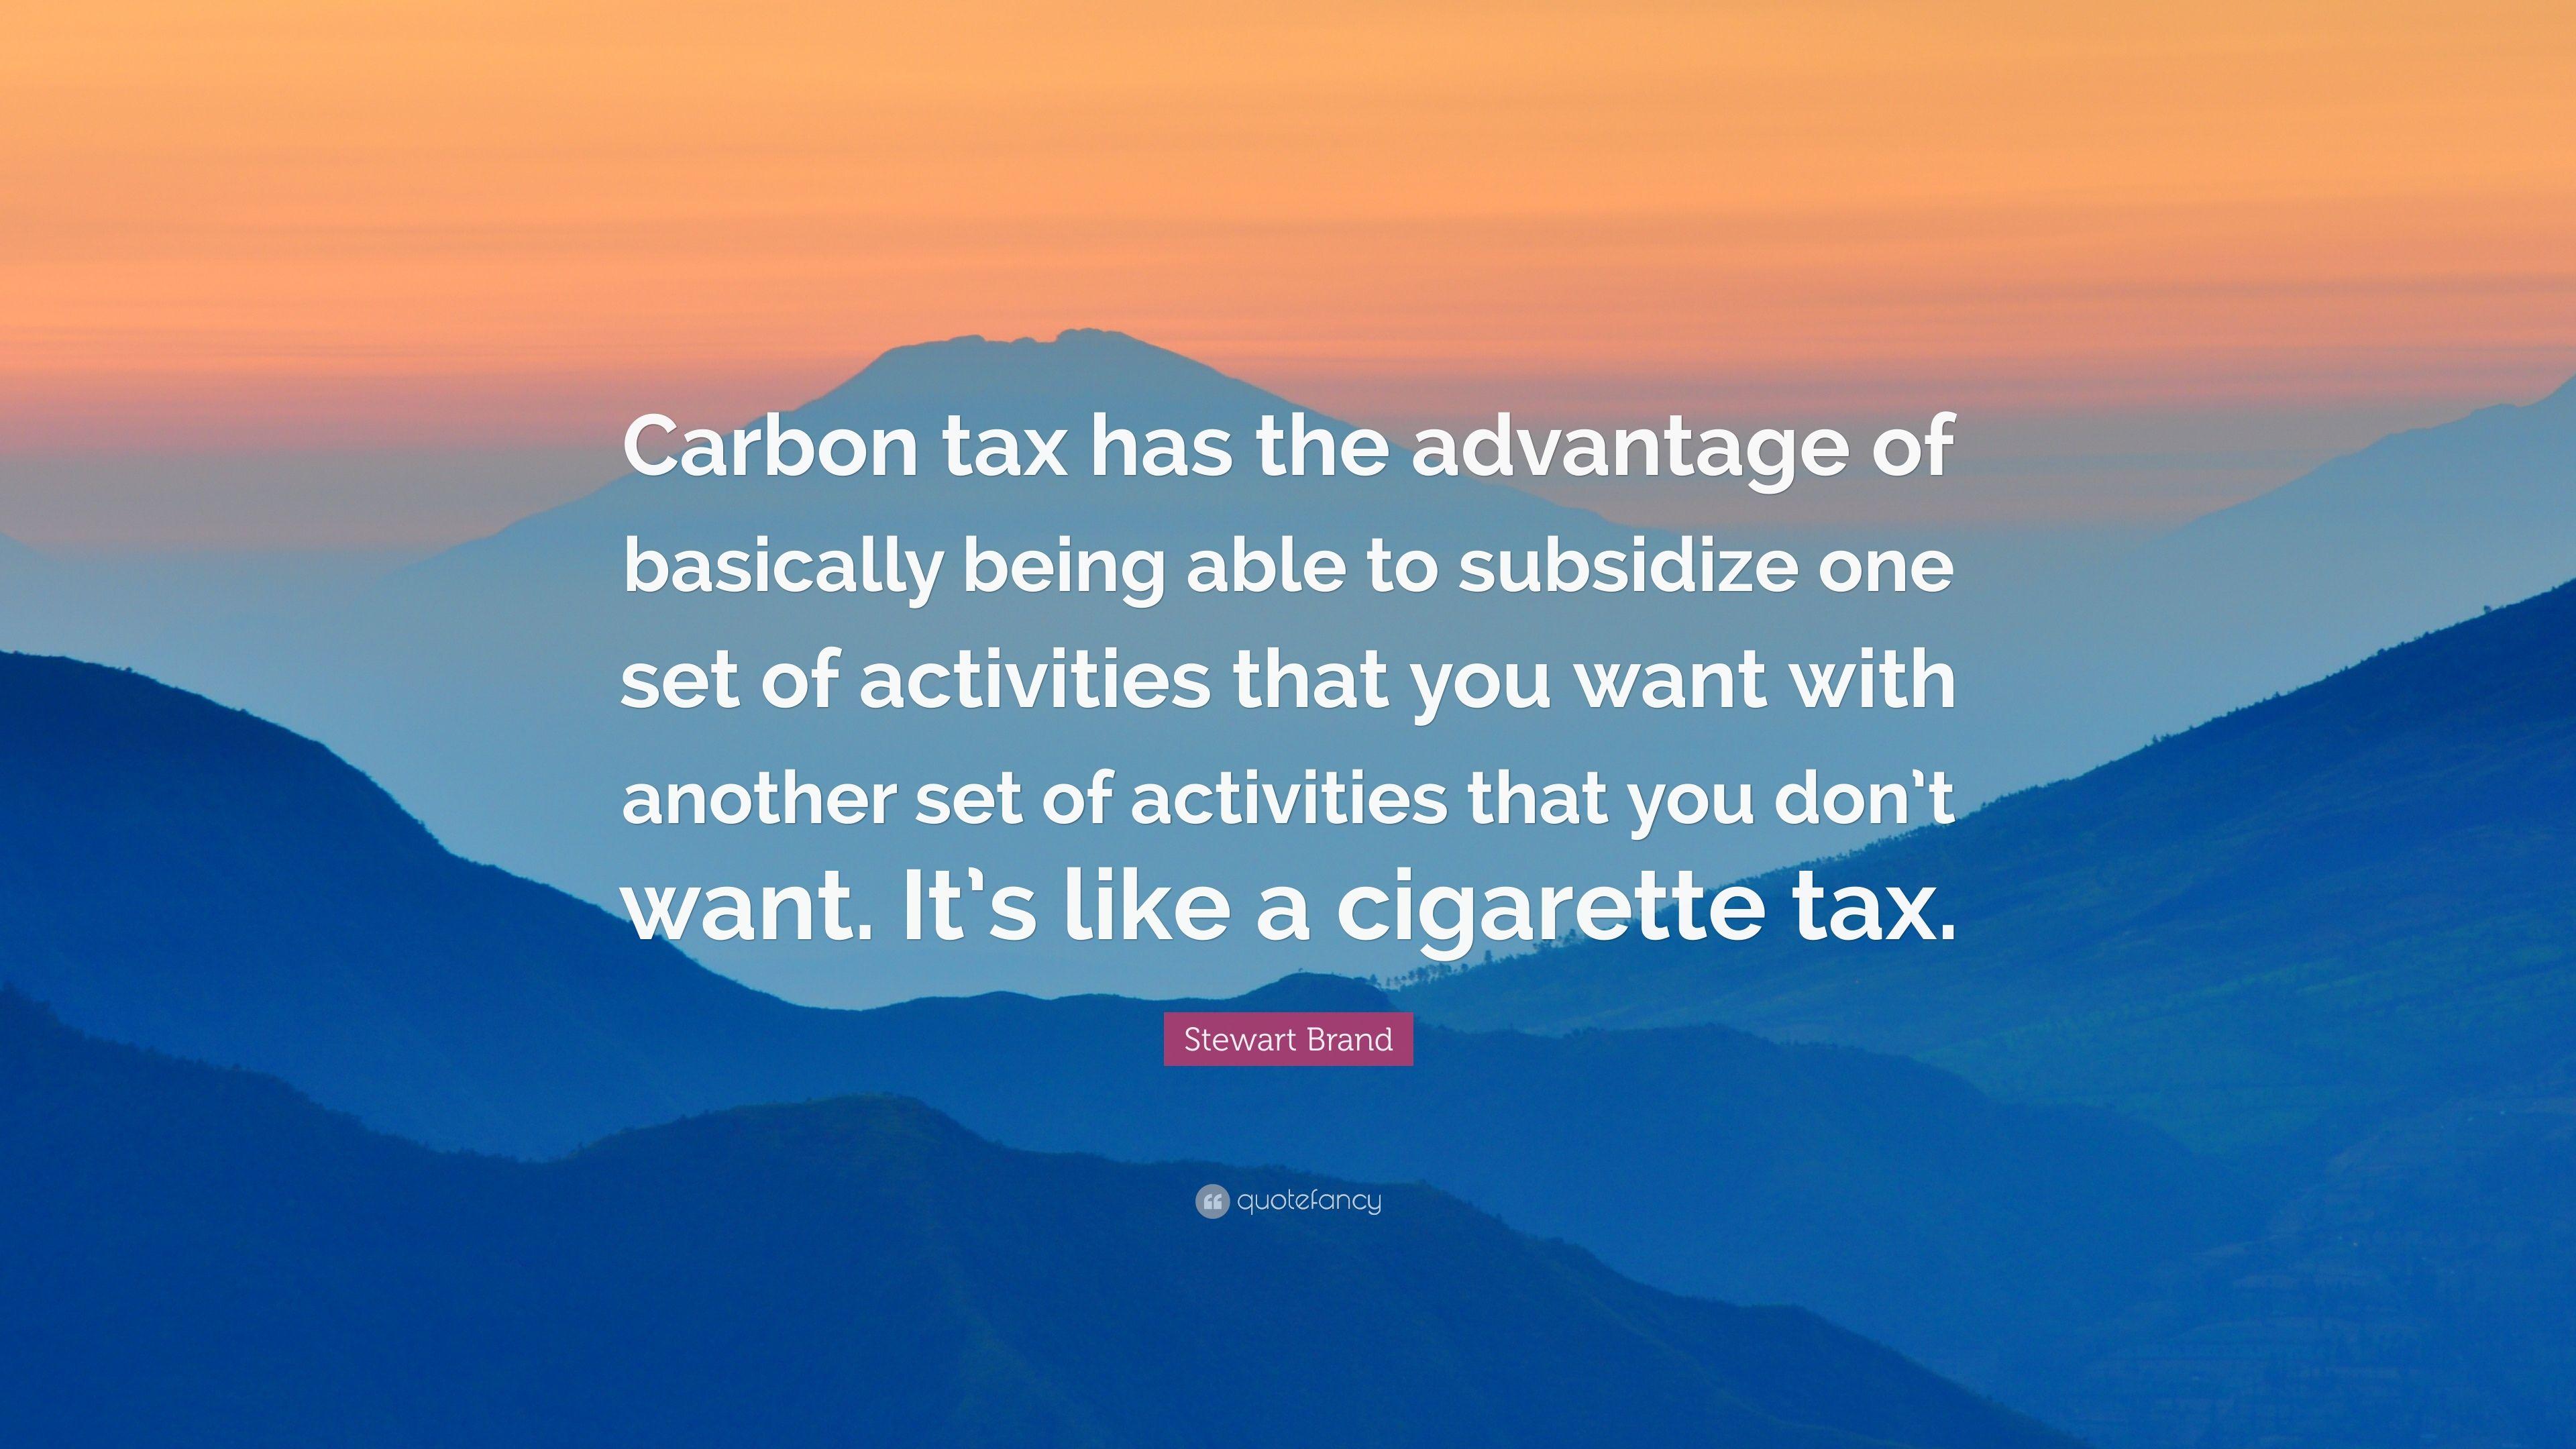 Stewart Brand Quote: “Carbon tax has the advantage of basically